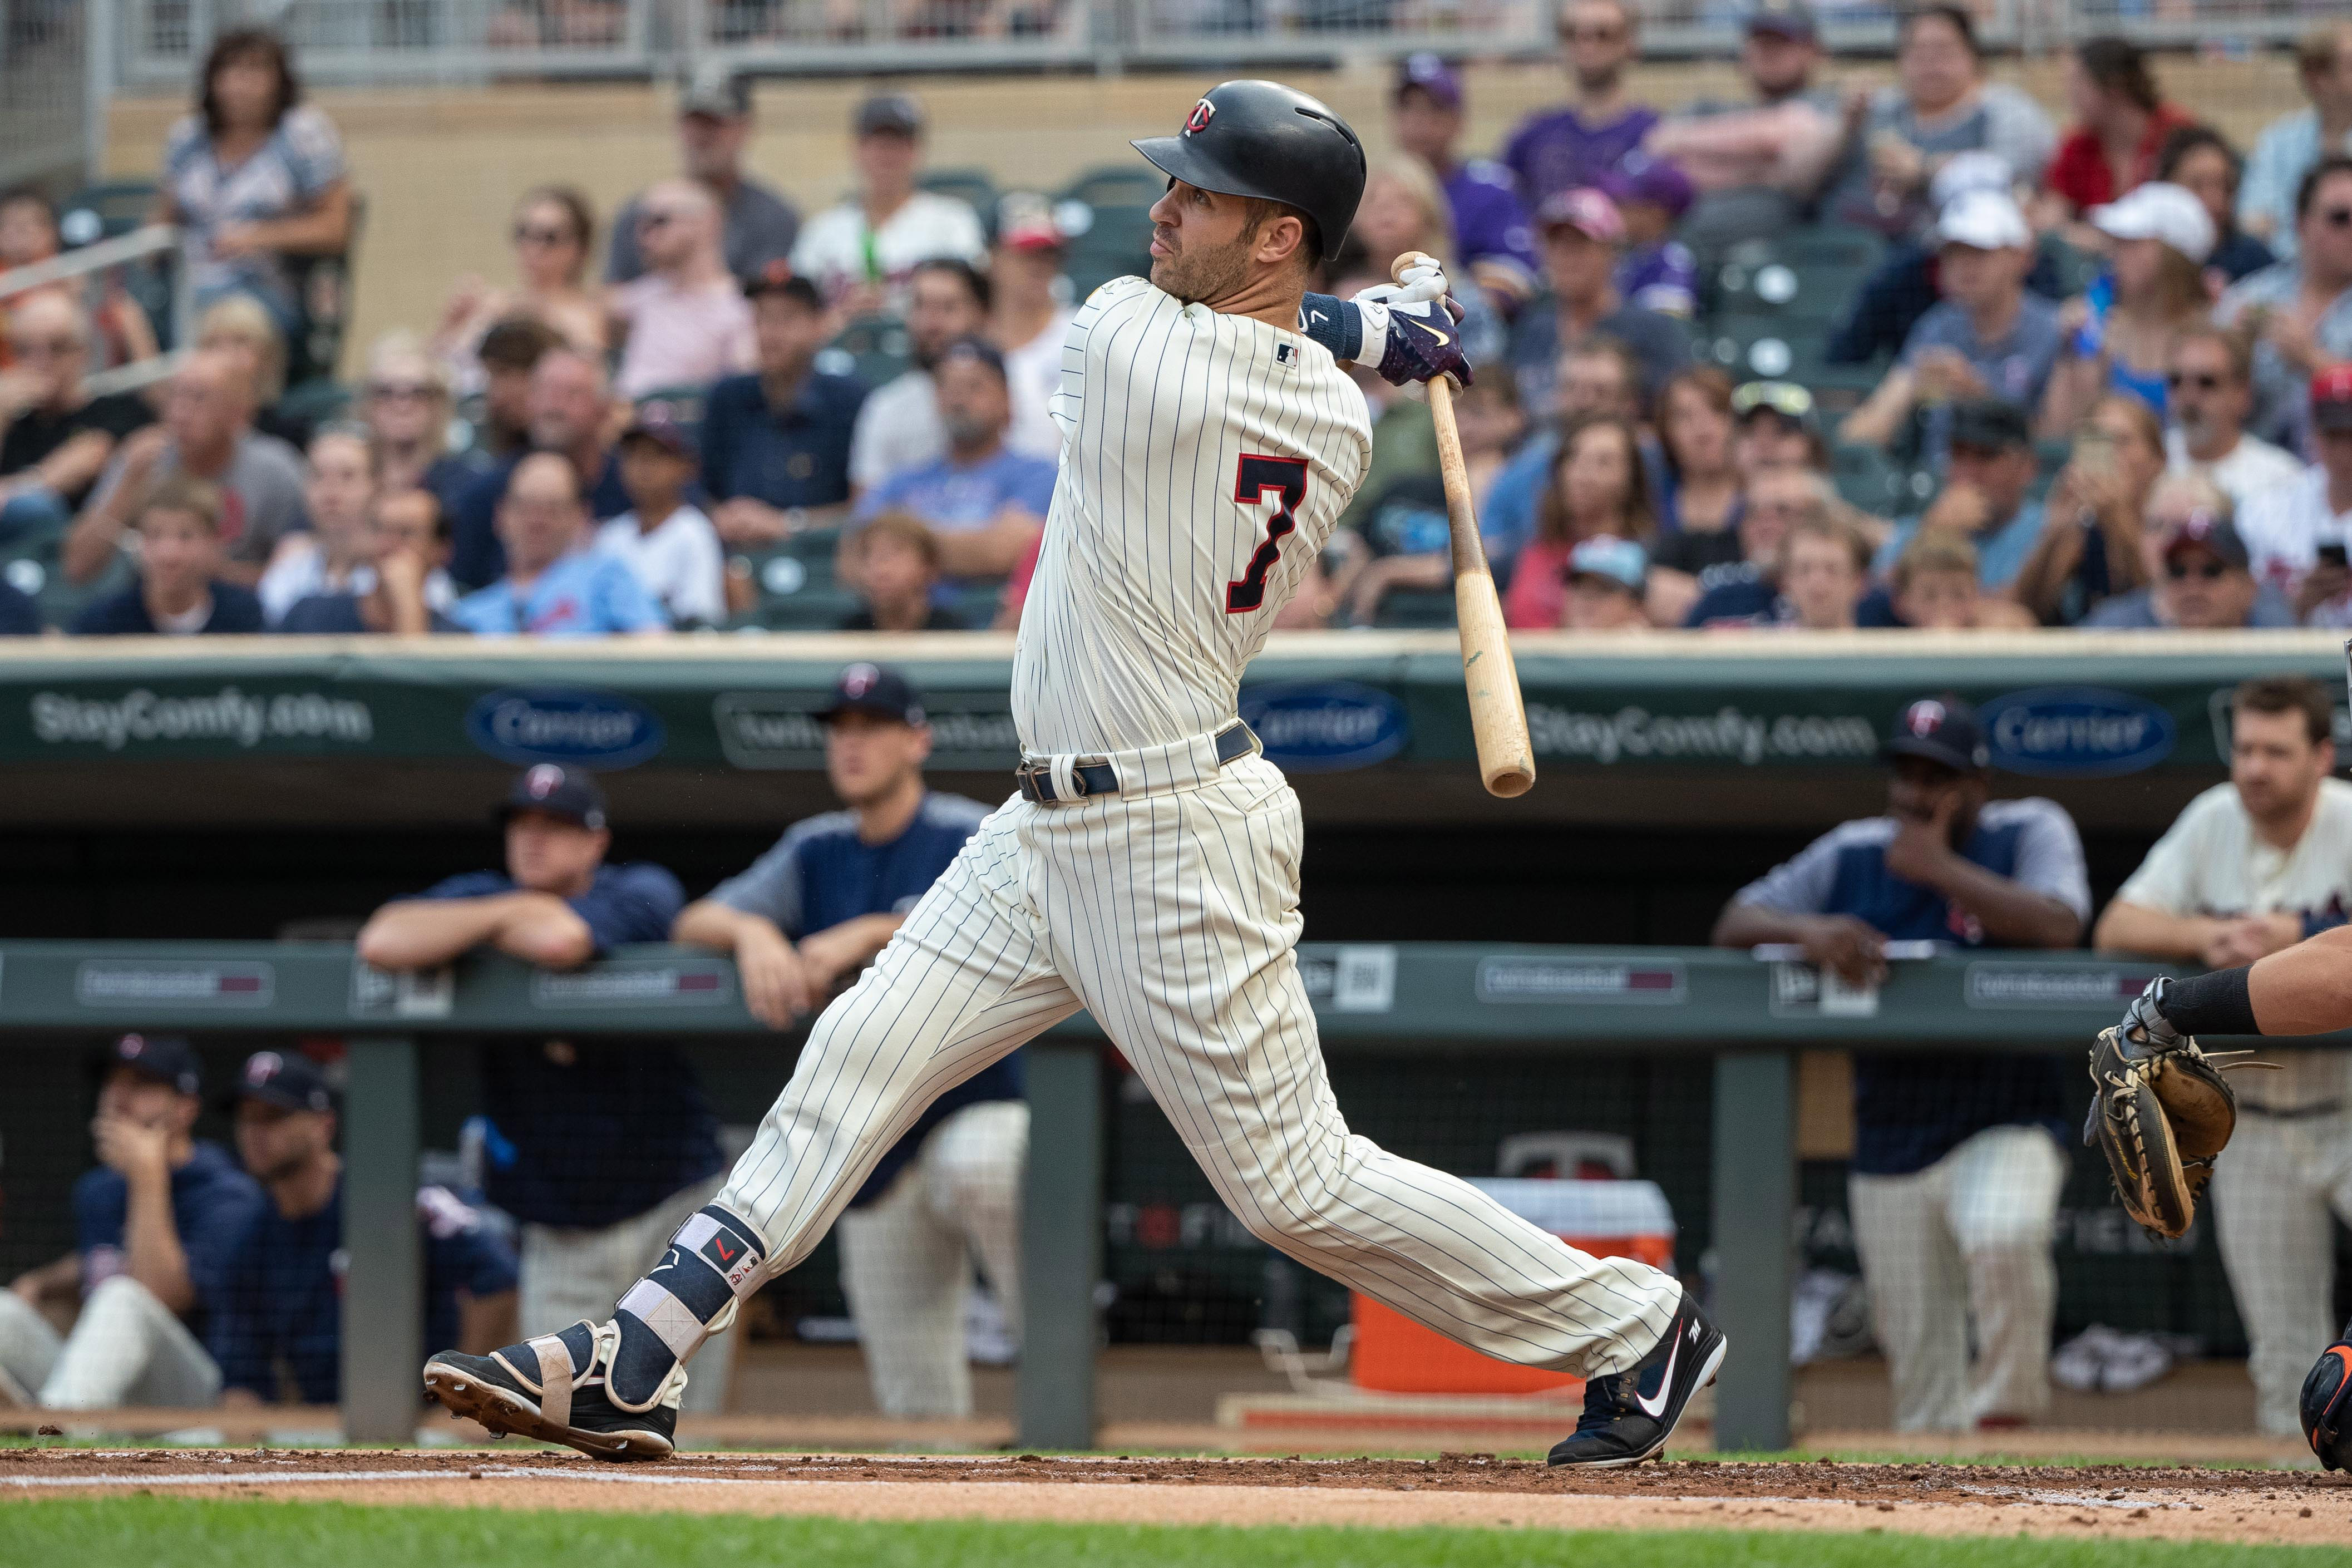 Joe Mauer to be inducted into Twins Hall of Fame in August - The Athletic